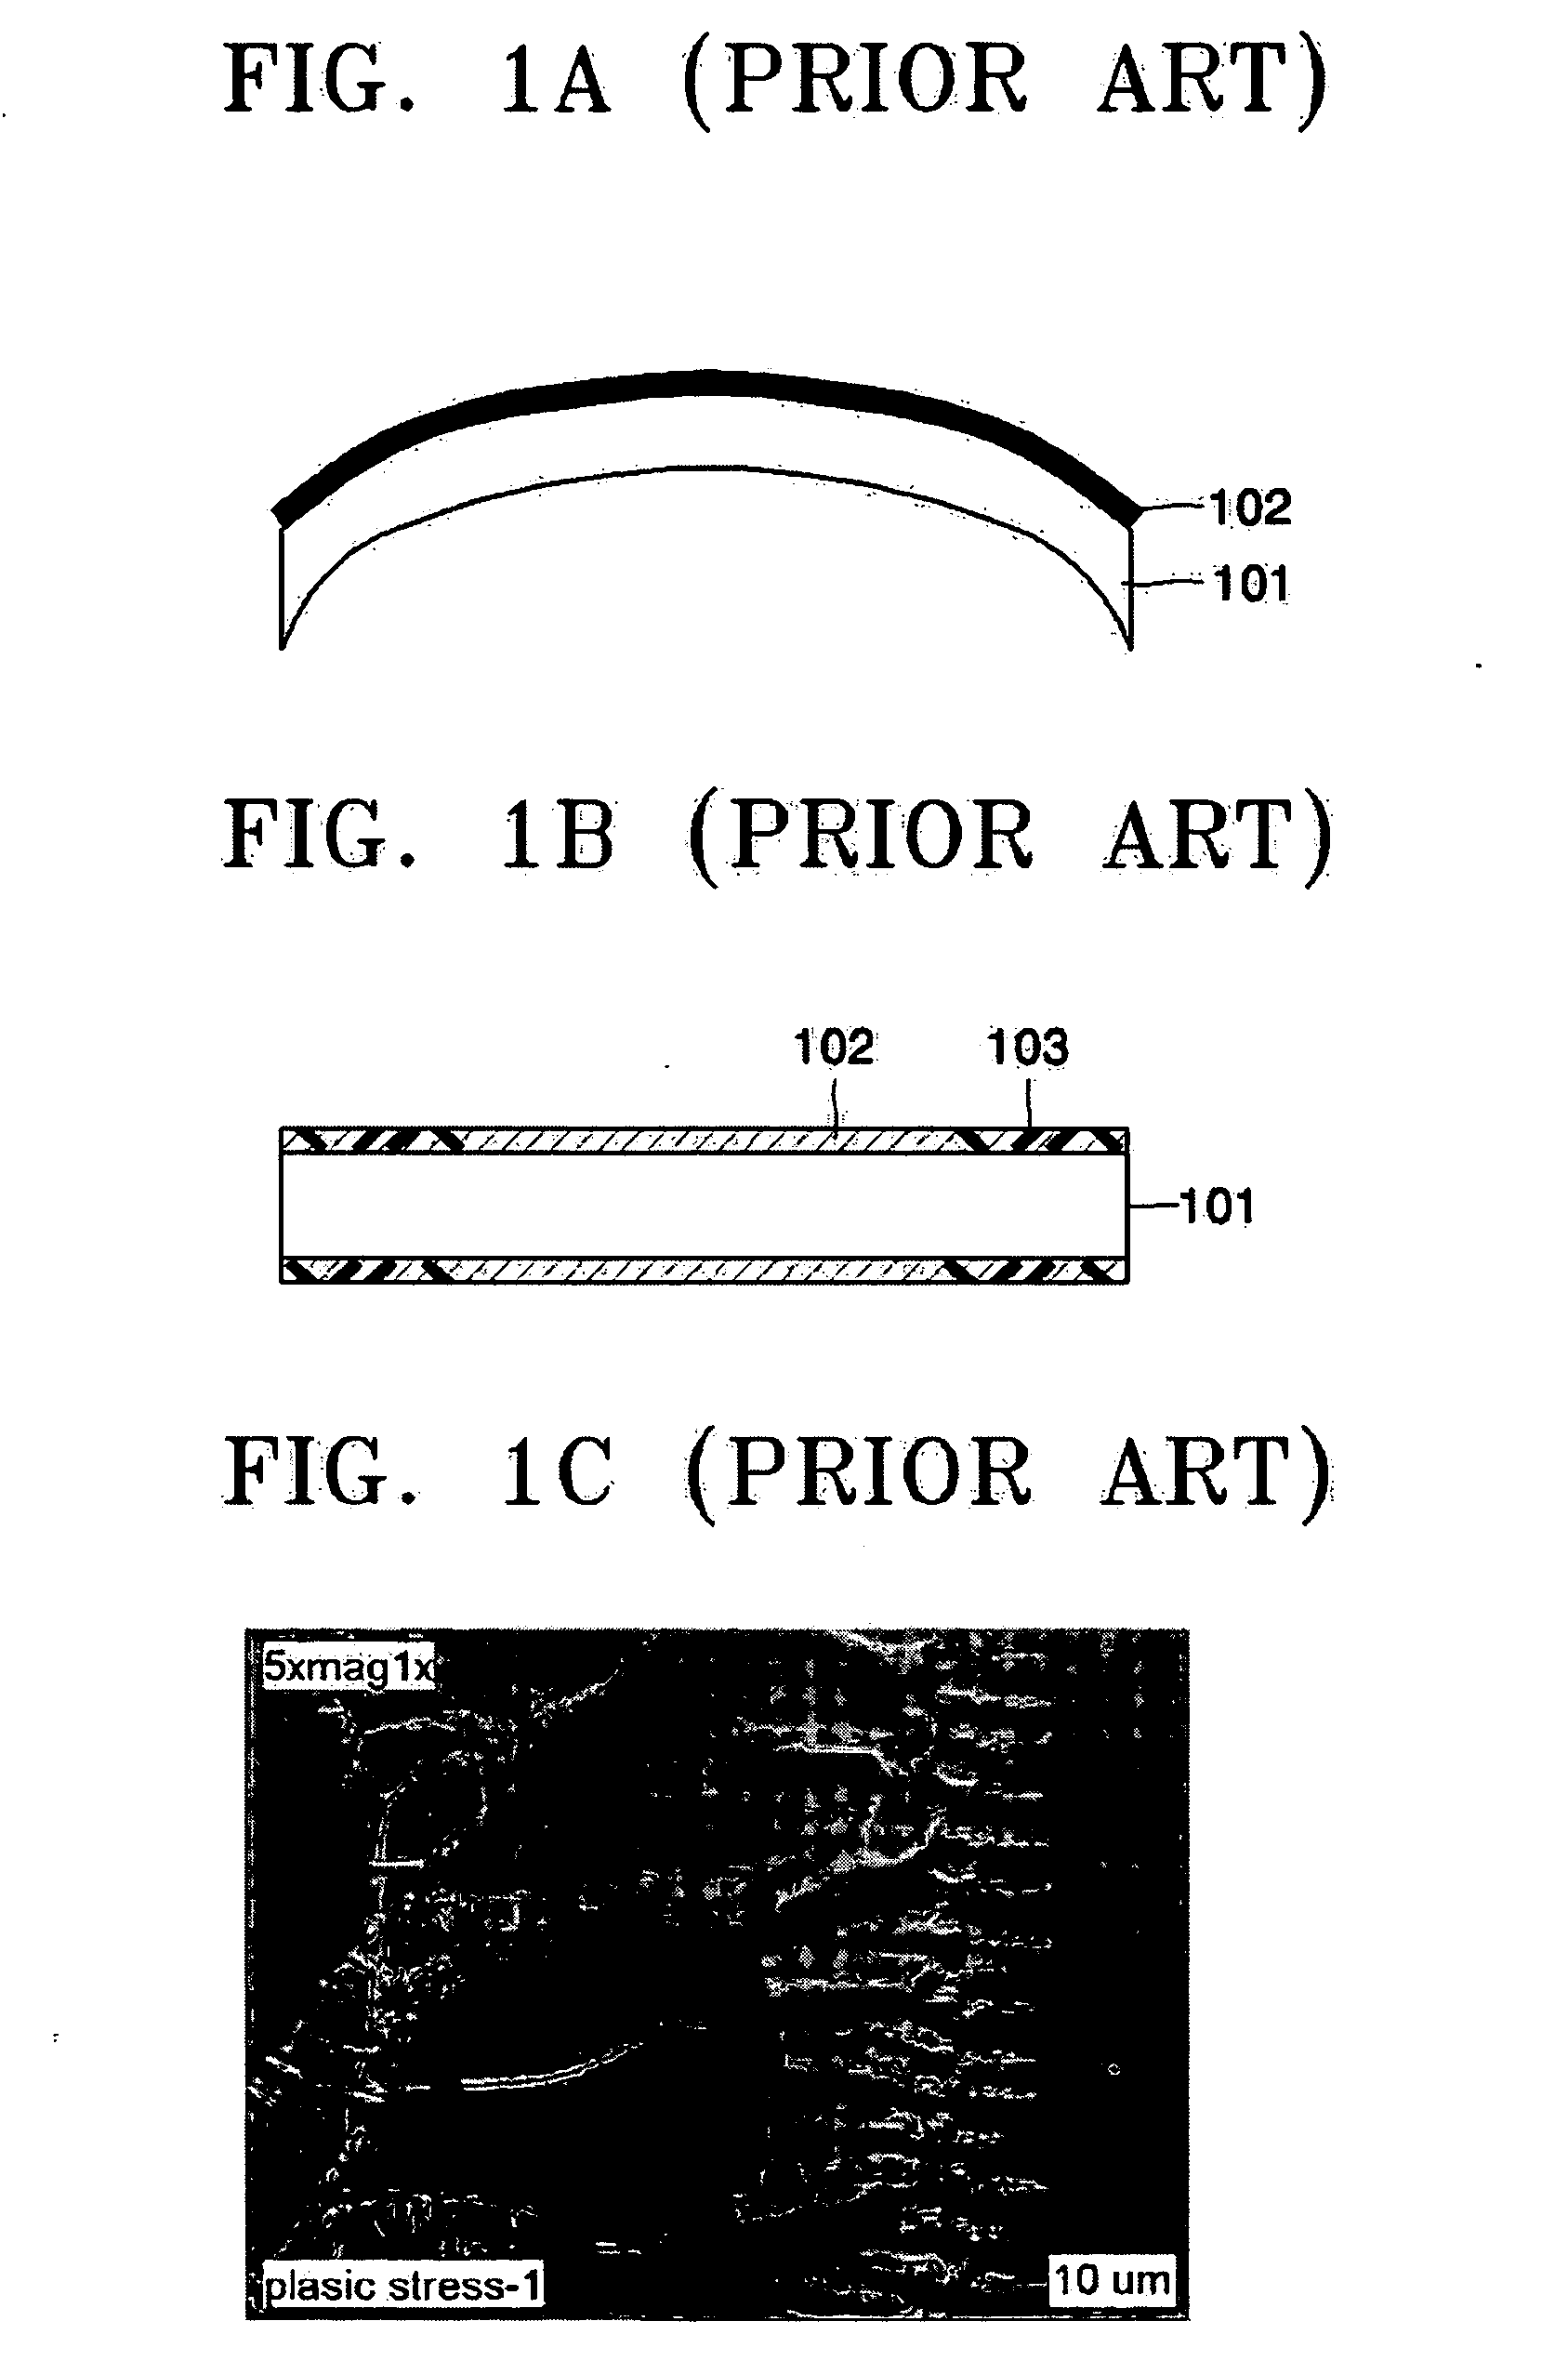 Plasma chemical vapor deposition system and method for coating both sides of substrate